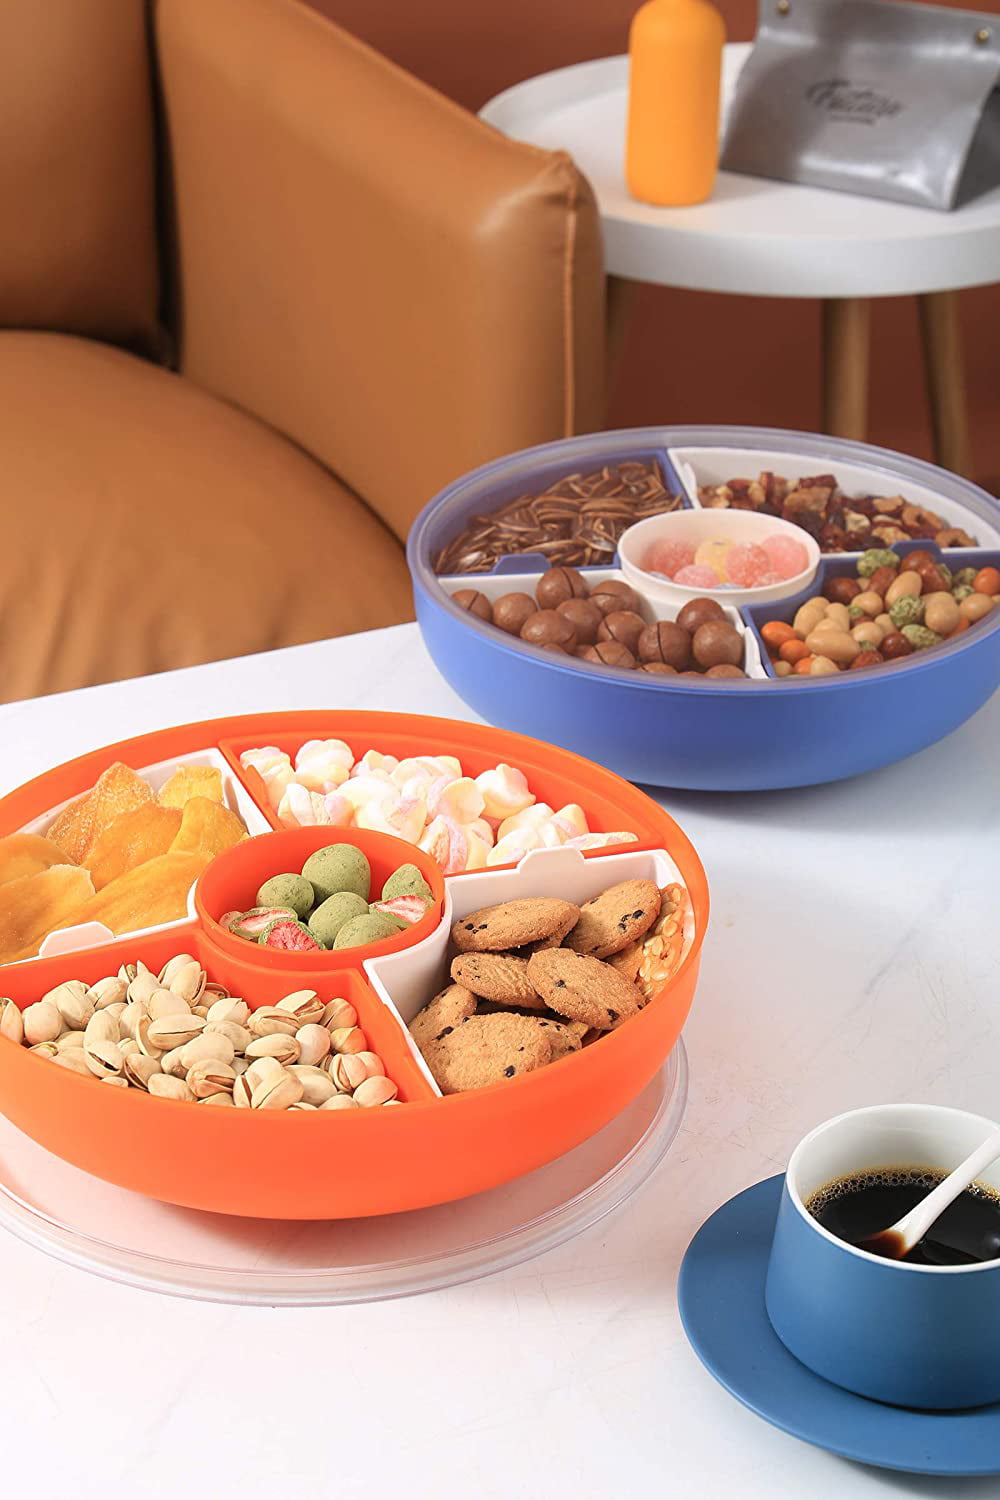 Blue XKXKKE Divided Serving Dishes with Lid,Serving Bowls,Multifunctional Party Snack Tray for Fruits,Nuts,Candies,Crackers,Veggies